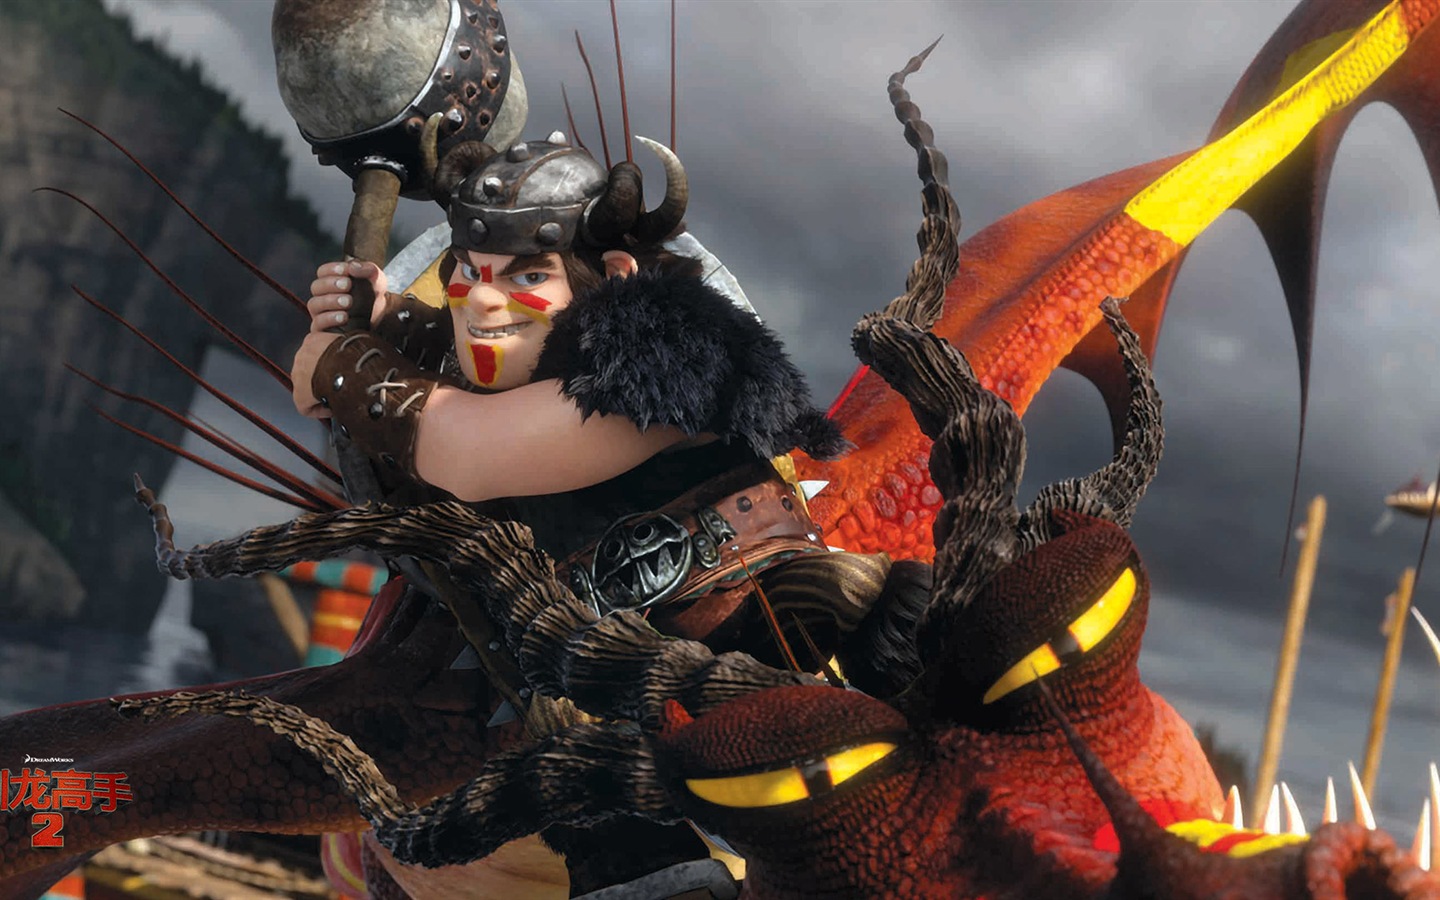 How to Train Your Dragon 2 HD wallpapers #12 - 1440x900